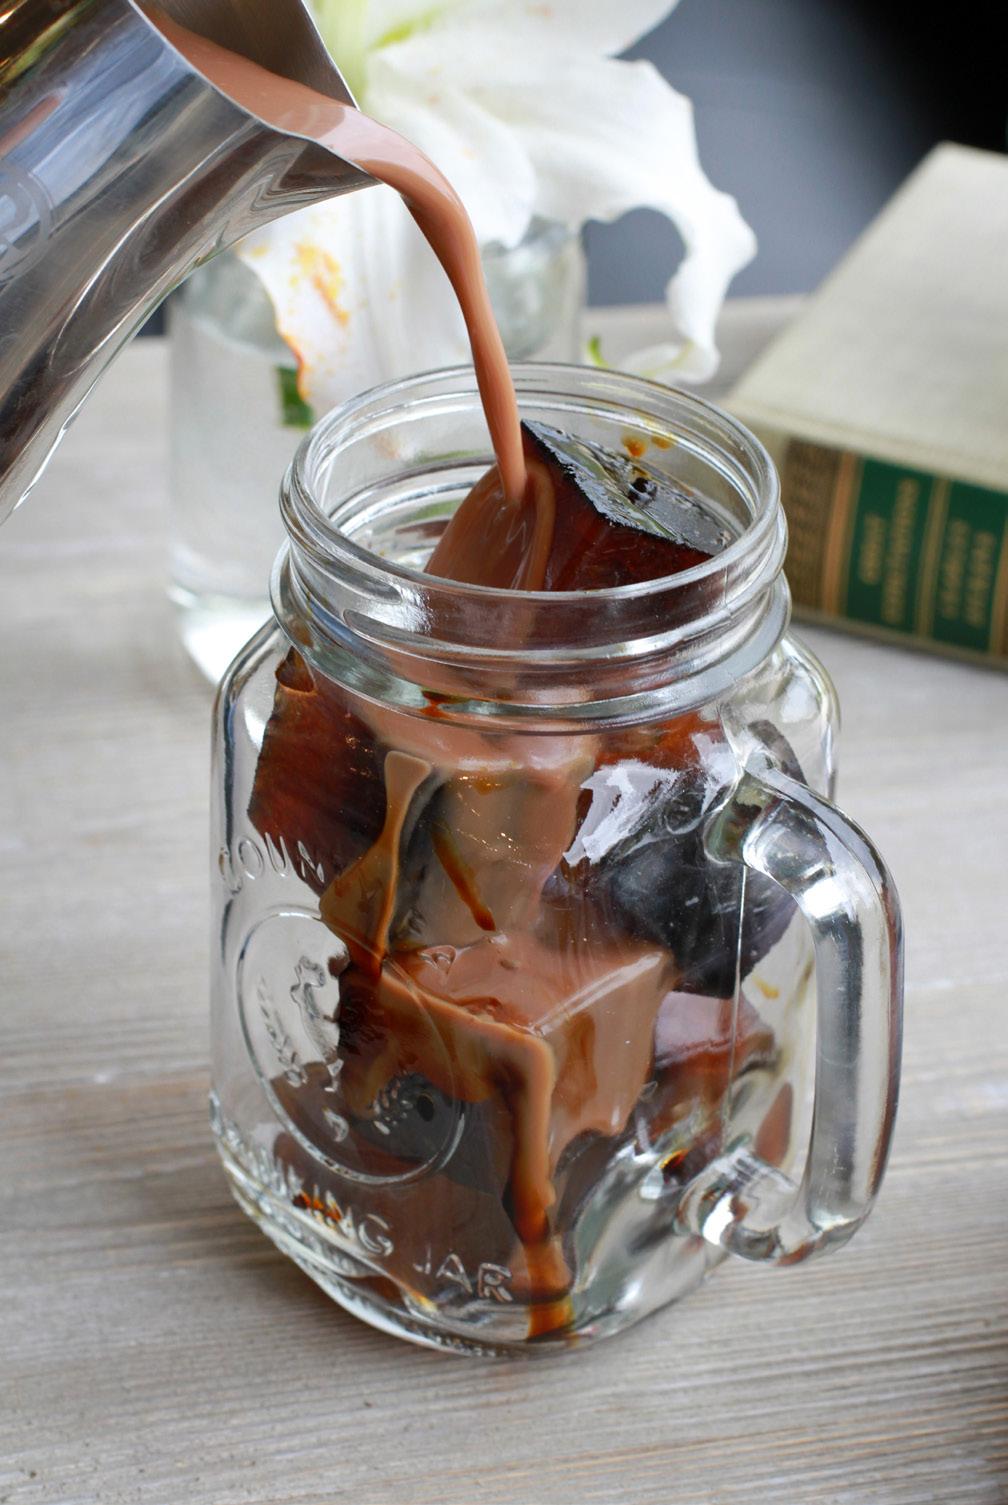 Chilled Chocolate Toddy Cold Brew is one of my favorite drinks on a hot summer afternoon. Inspired by Nutella hazelnut spread, this variation is the perfect combination of refreshing and indulgent.